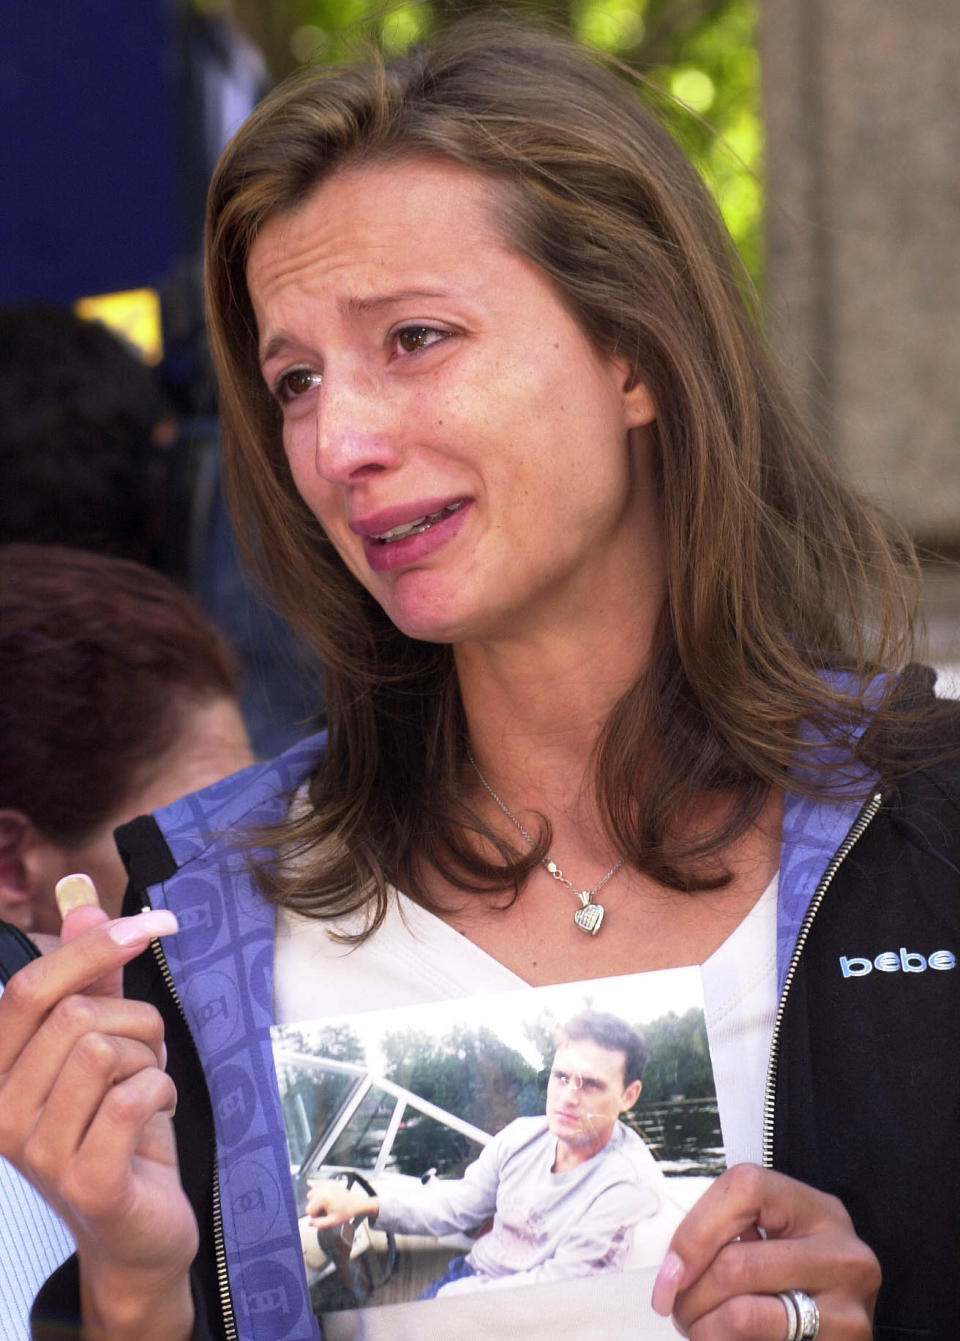 New York City--The pain is etched on Monica Iken's face as she holds pix of her husband Michael Iken (Dale Brazao / Toronto Star via Getty Images)